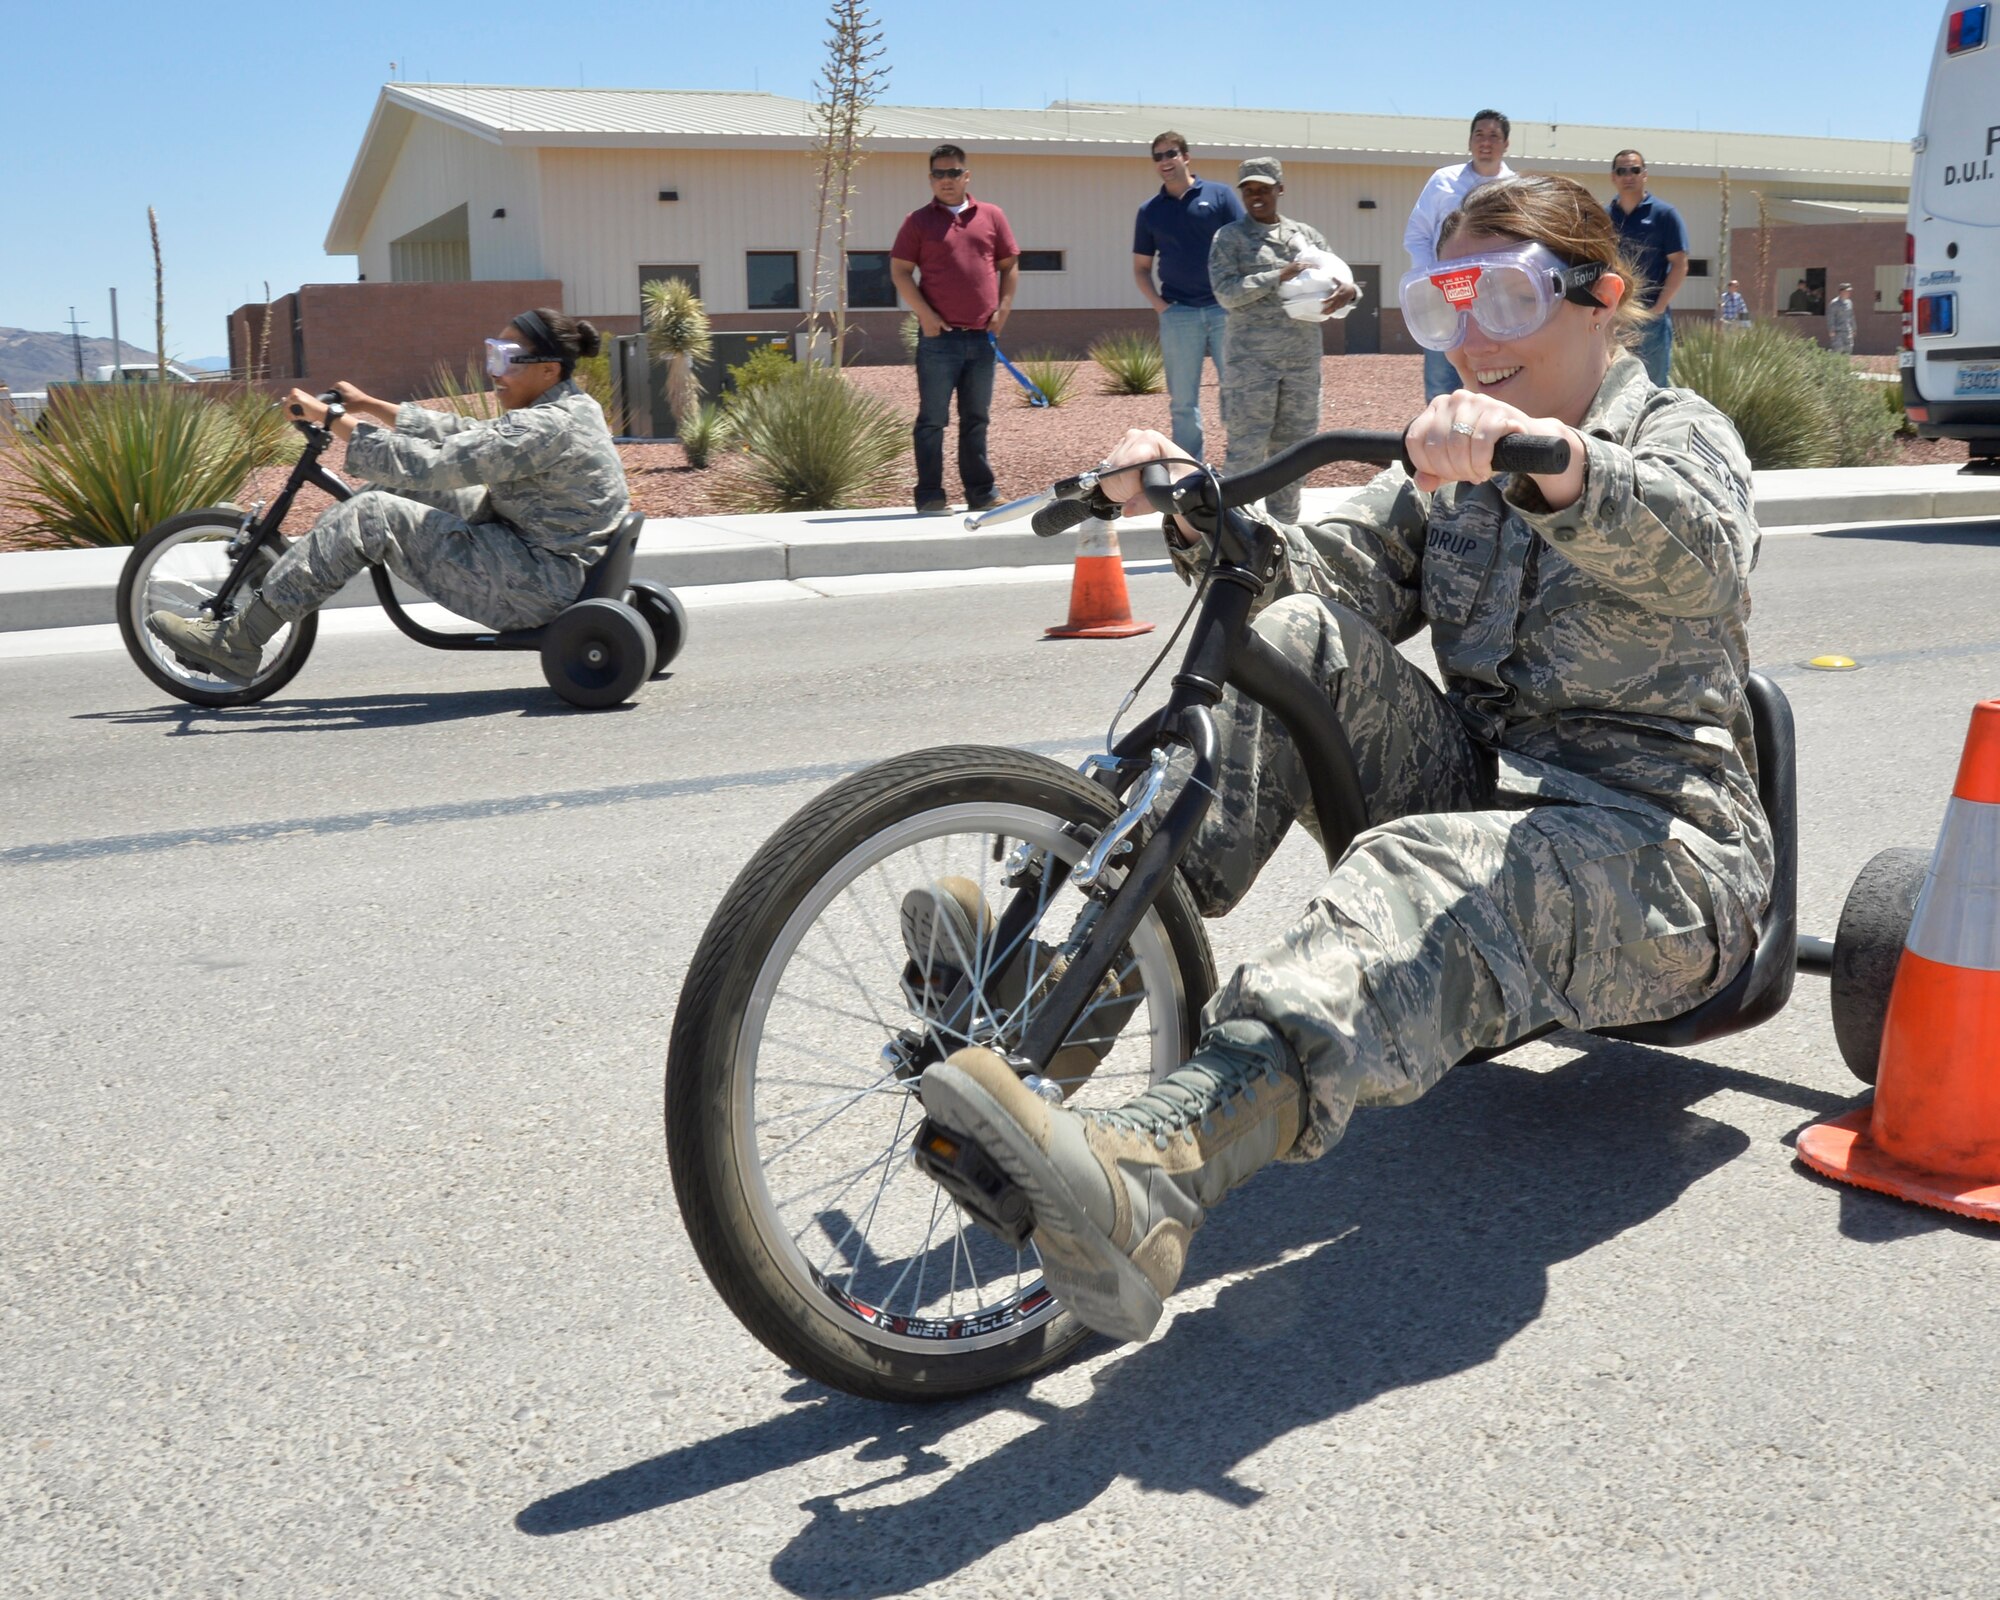 Staff Sgt. Karen, 432nd Operations Support Squadron aviation resource manager, front, and Senior Airman Christy, 432nd OSS command support staff, race through cones on tricycles wearing fatal vision goggles during a demonstration for Police Week May 13, 2014. The fatal vision goggles provided by the Las Vegas Police department are designed to give a person the feeling of what it is like to be intoxicated which makes motor skills more challenging by distorting the vision (Last names have been withheld for security reasons). (U.S. Air Force photo by Staff Sgt. A.K./Released)